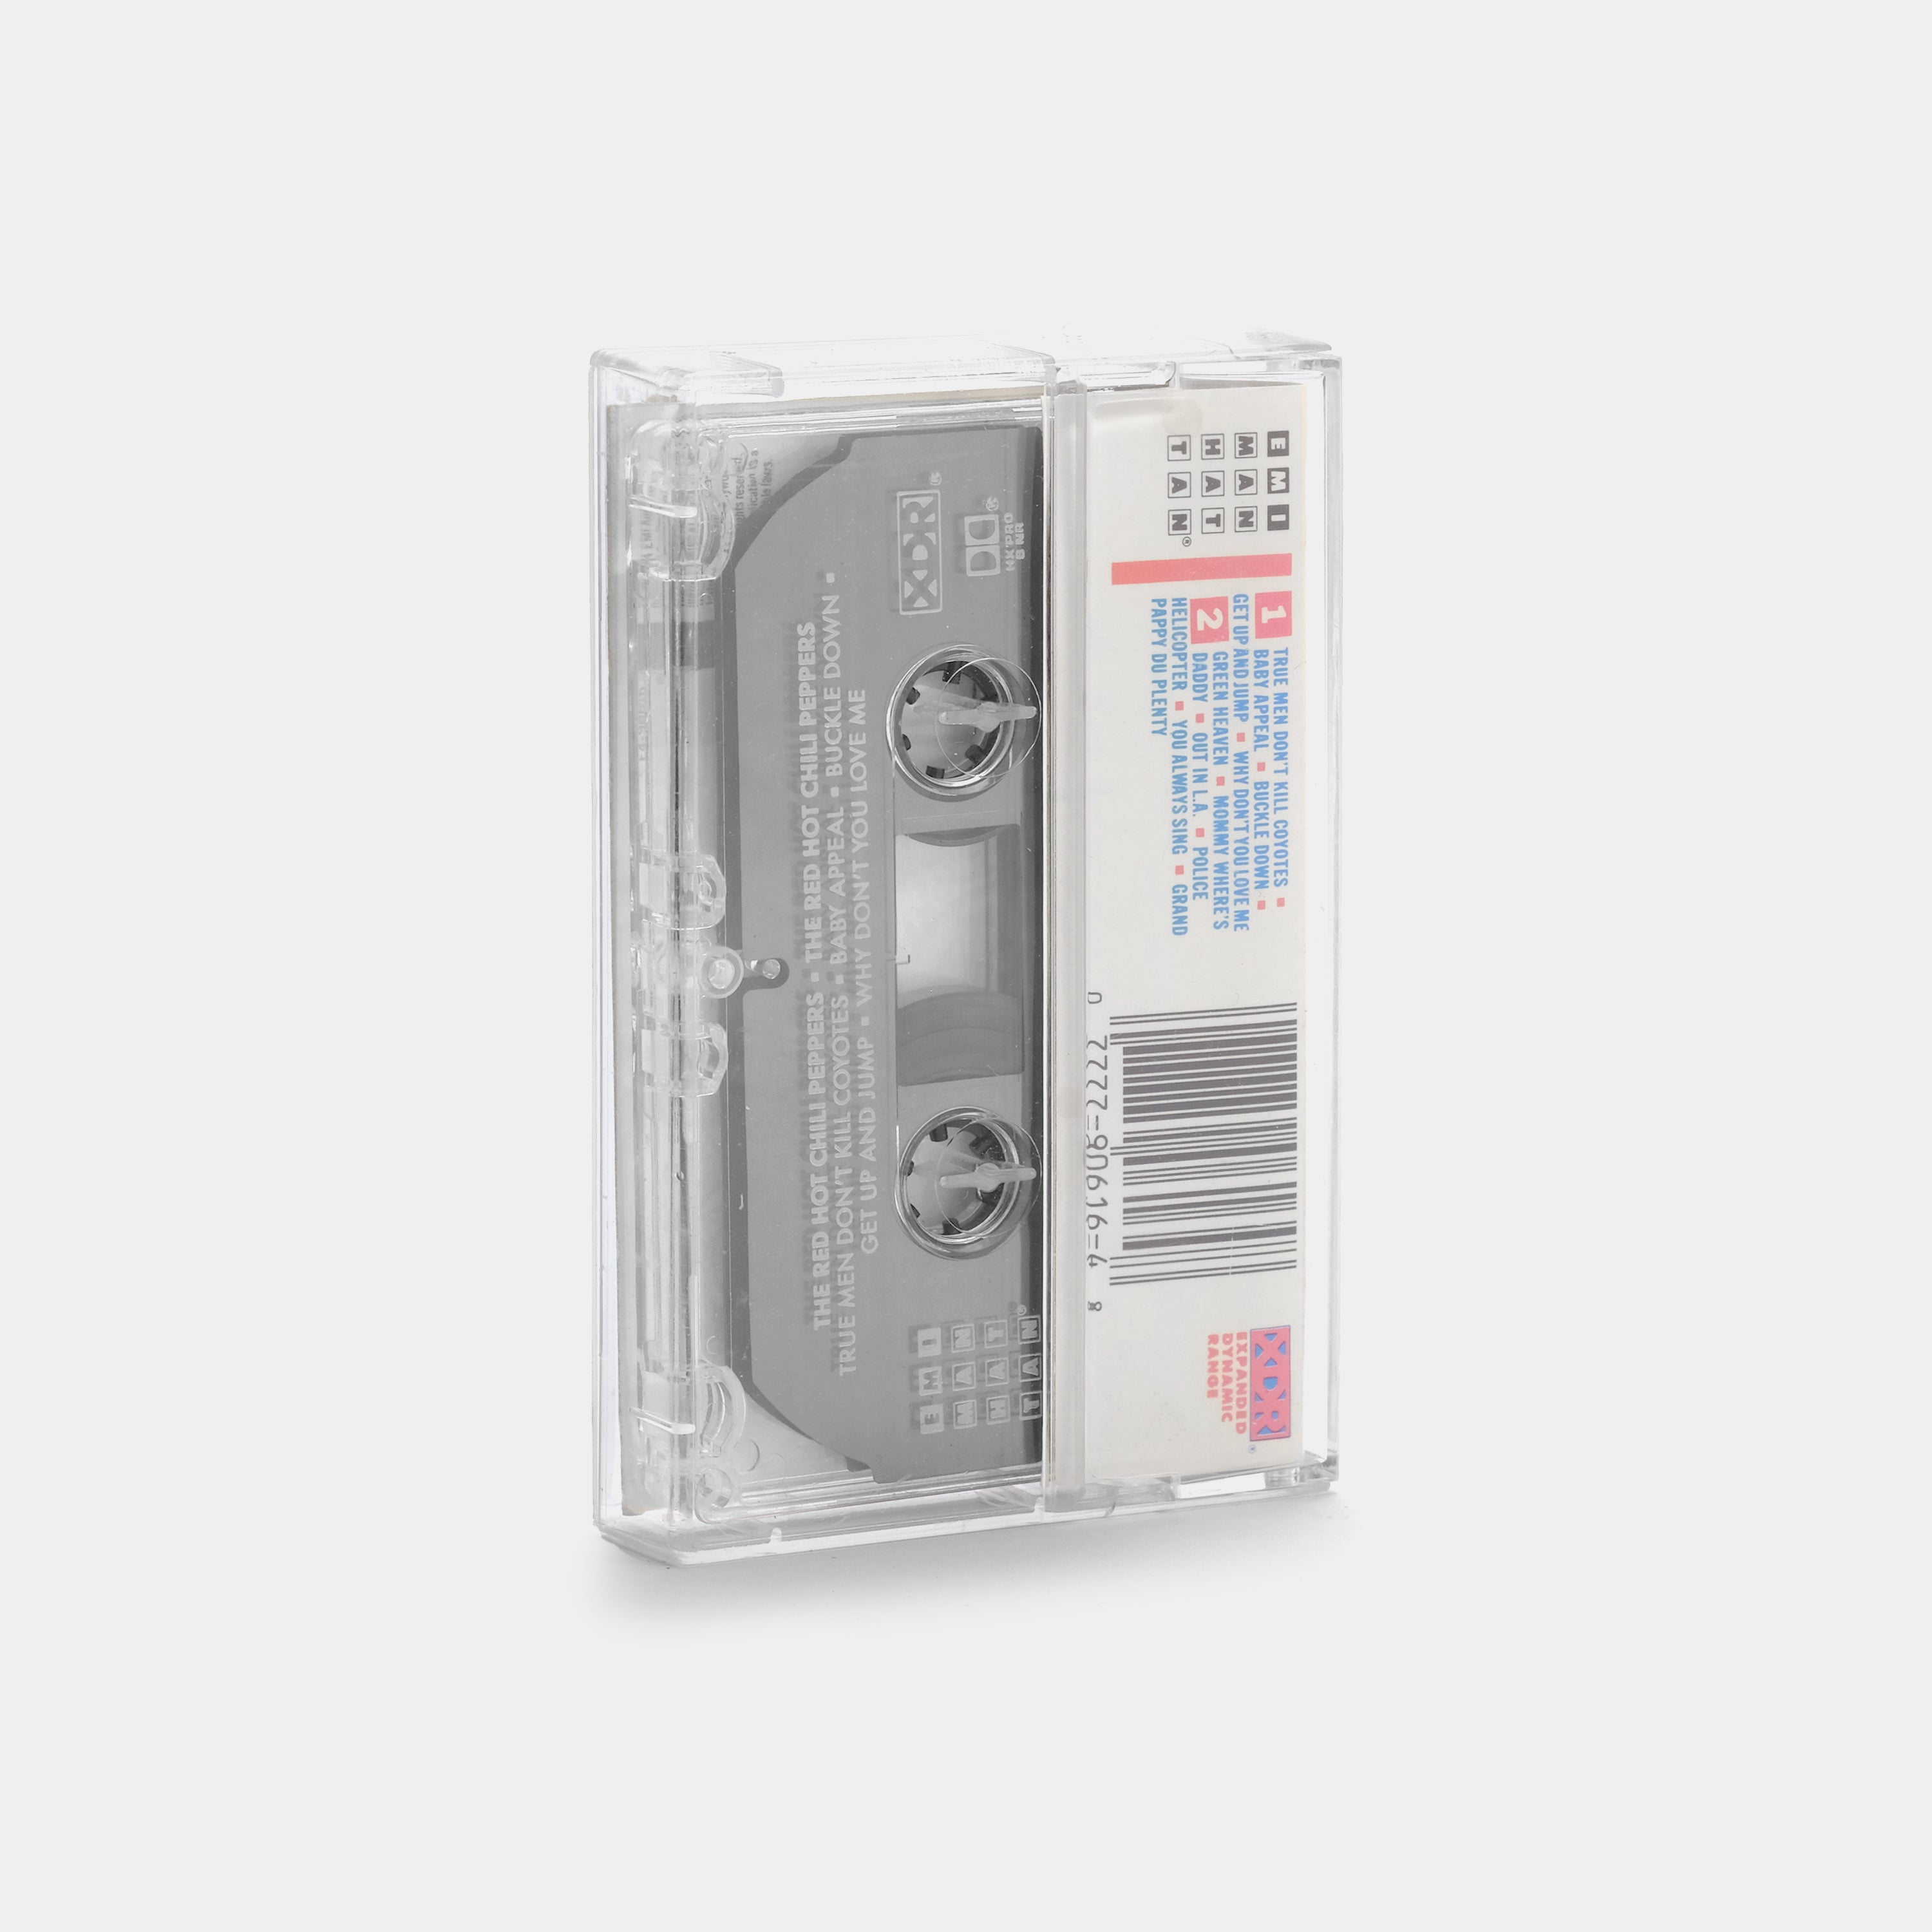 Red Hot Chili Peppers - The Red Hot Chili Peppers Cassette Tape